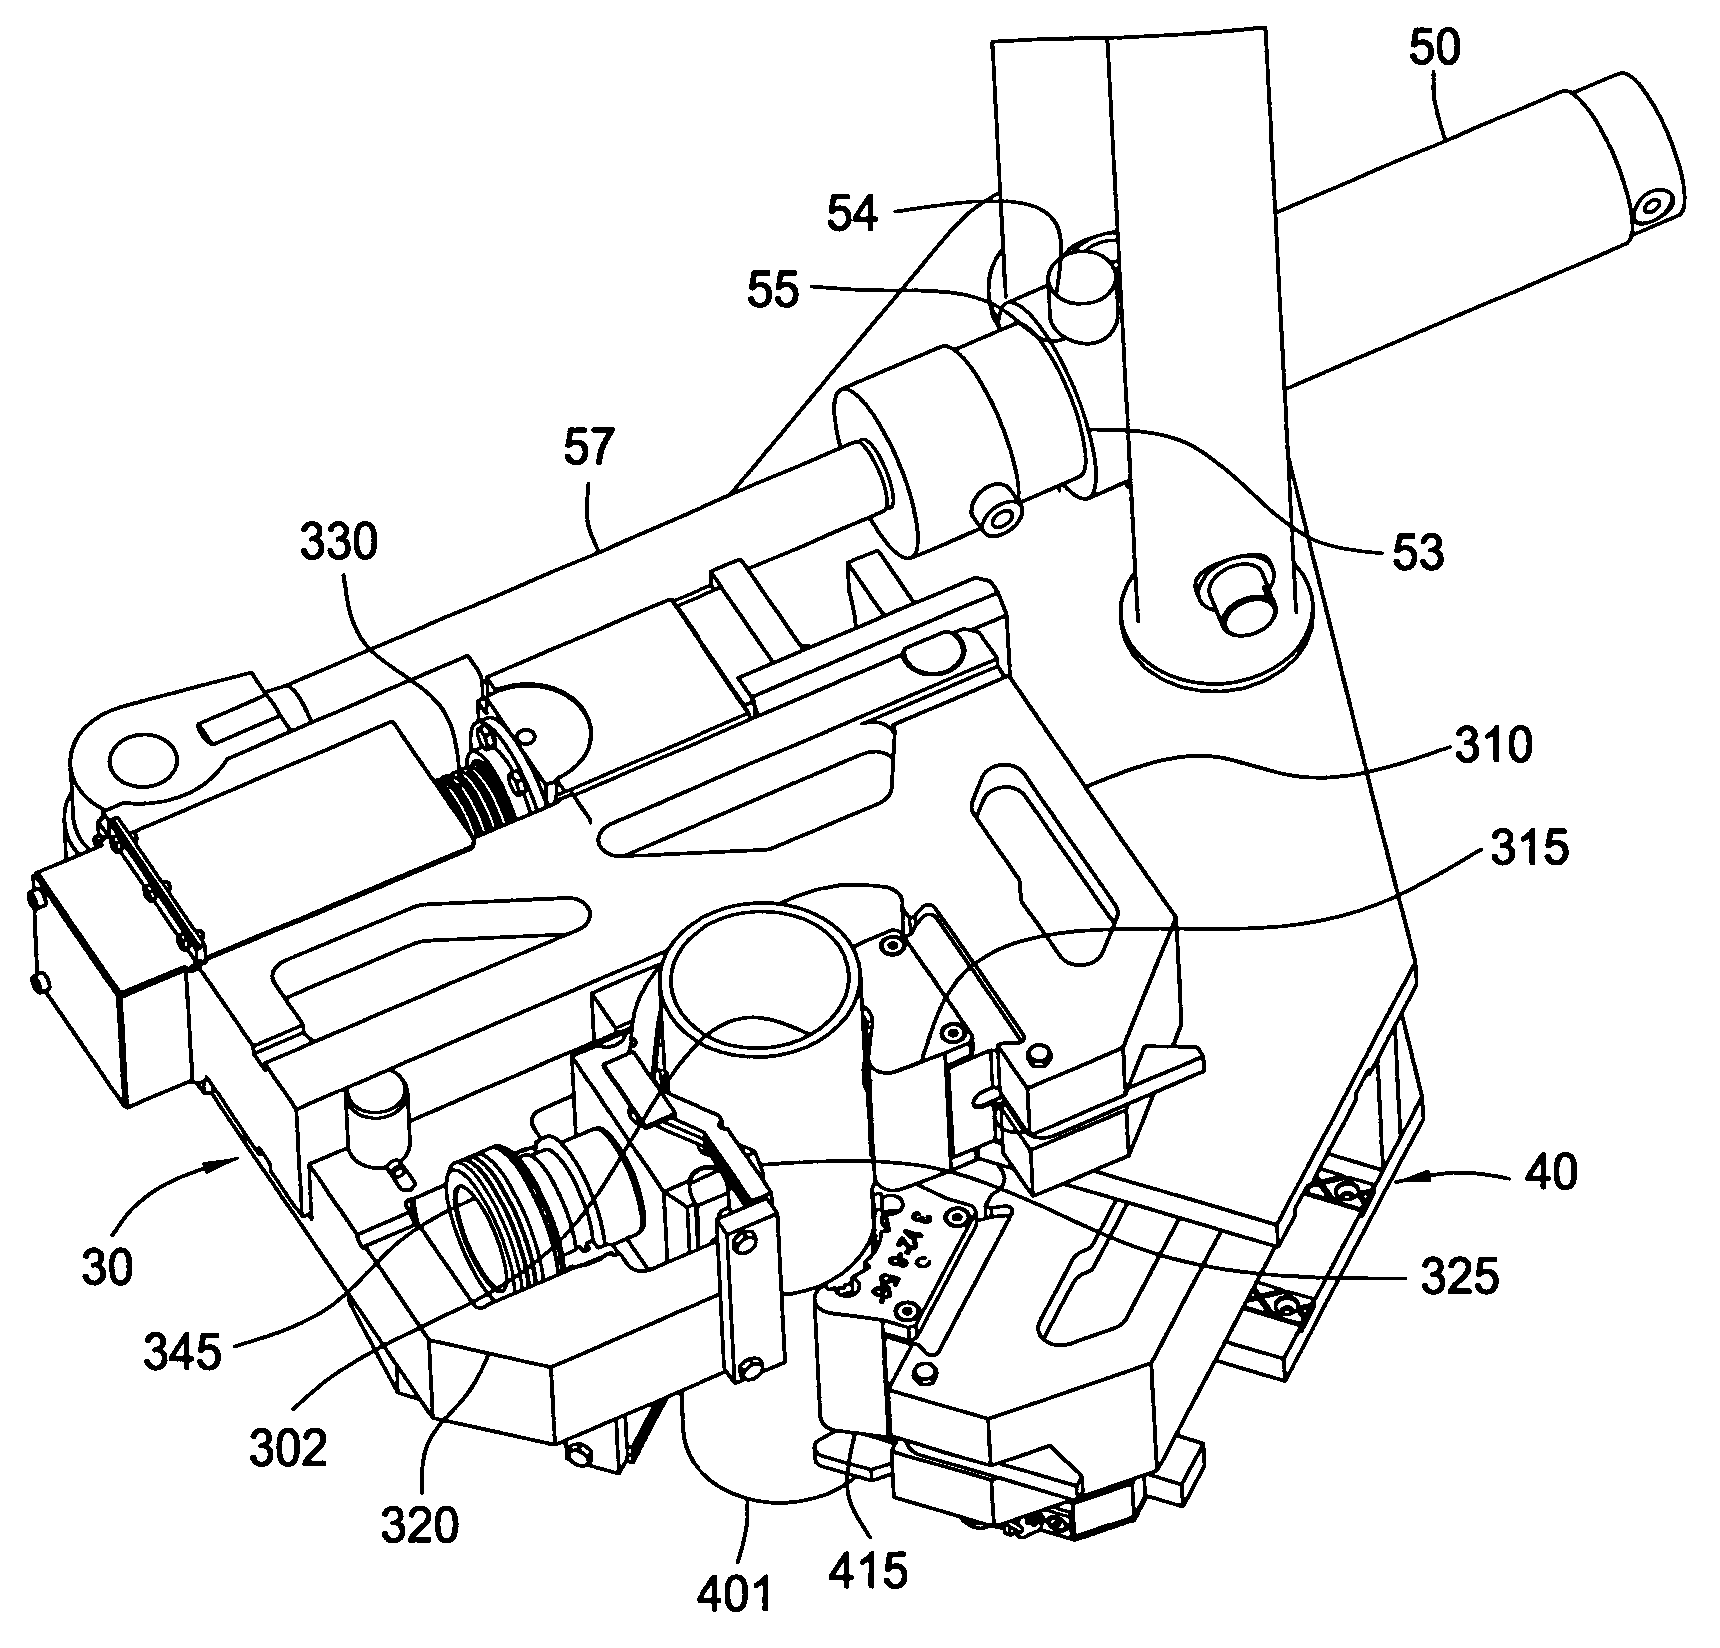 Apparatus and methods for connecting tubulars